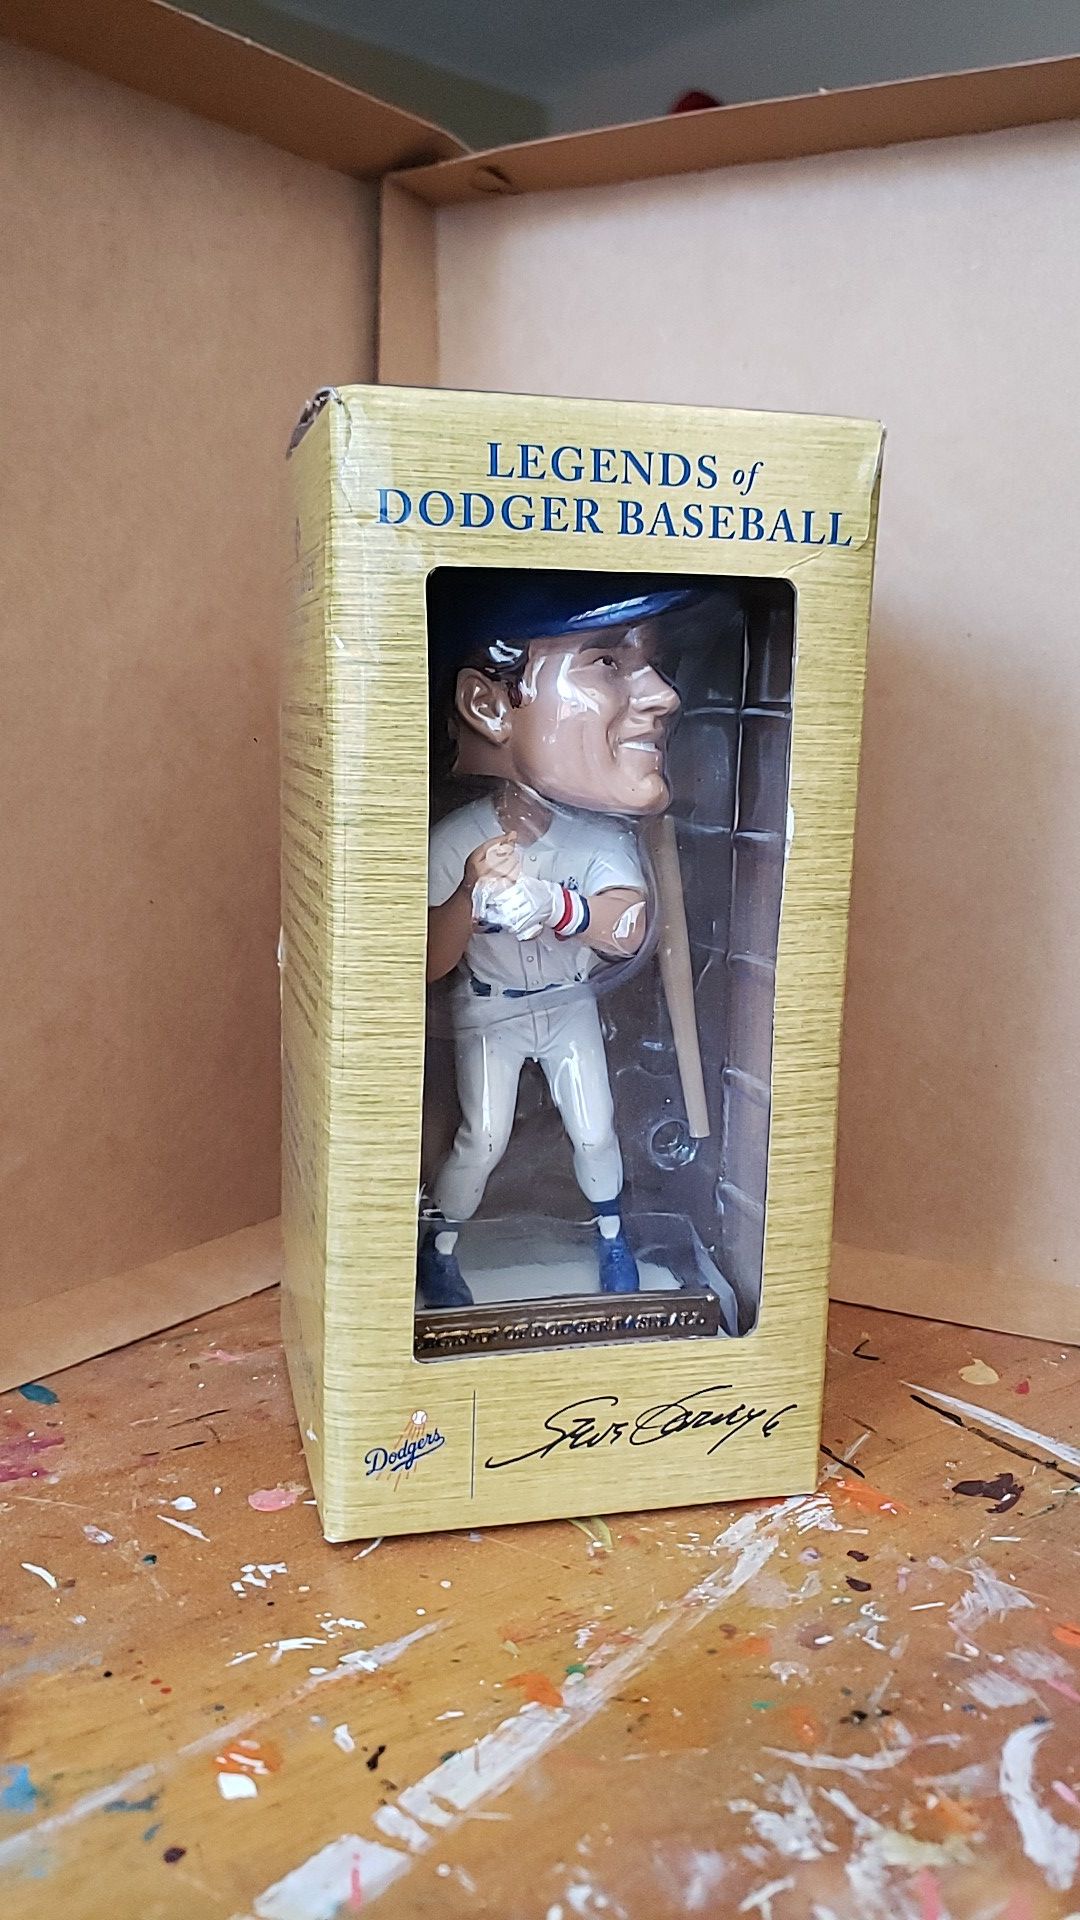 Dodgers collectable, Steve Garvey, bobblehead 2019, new in box